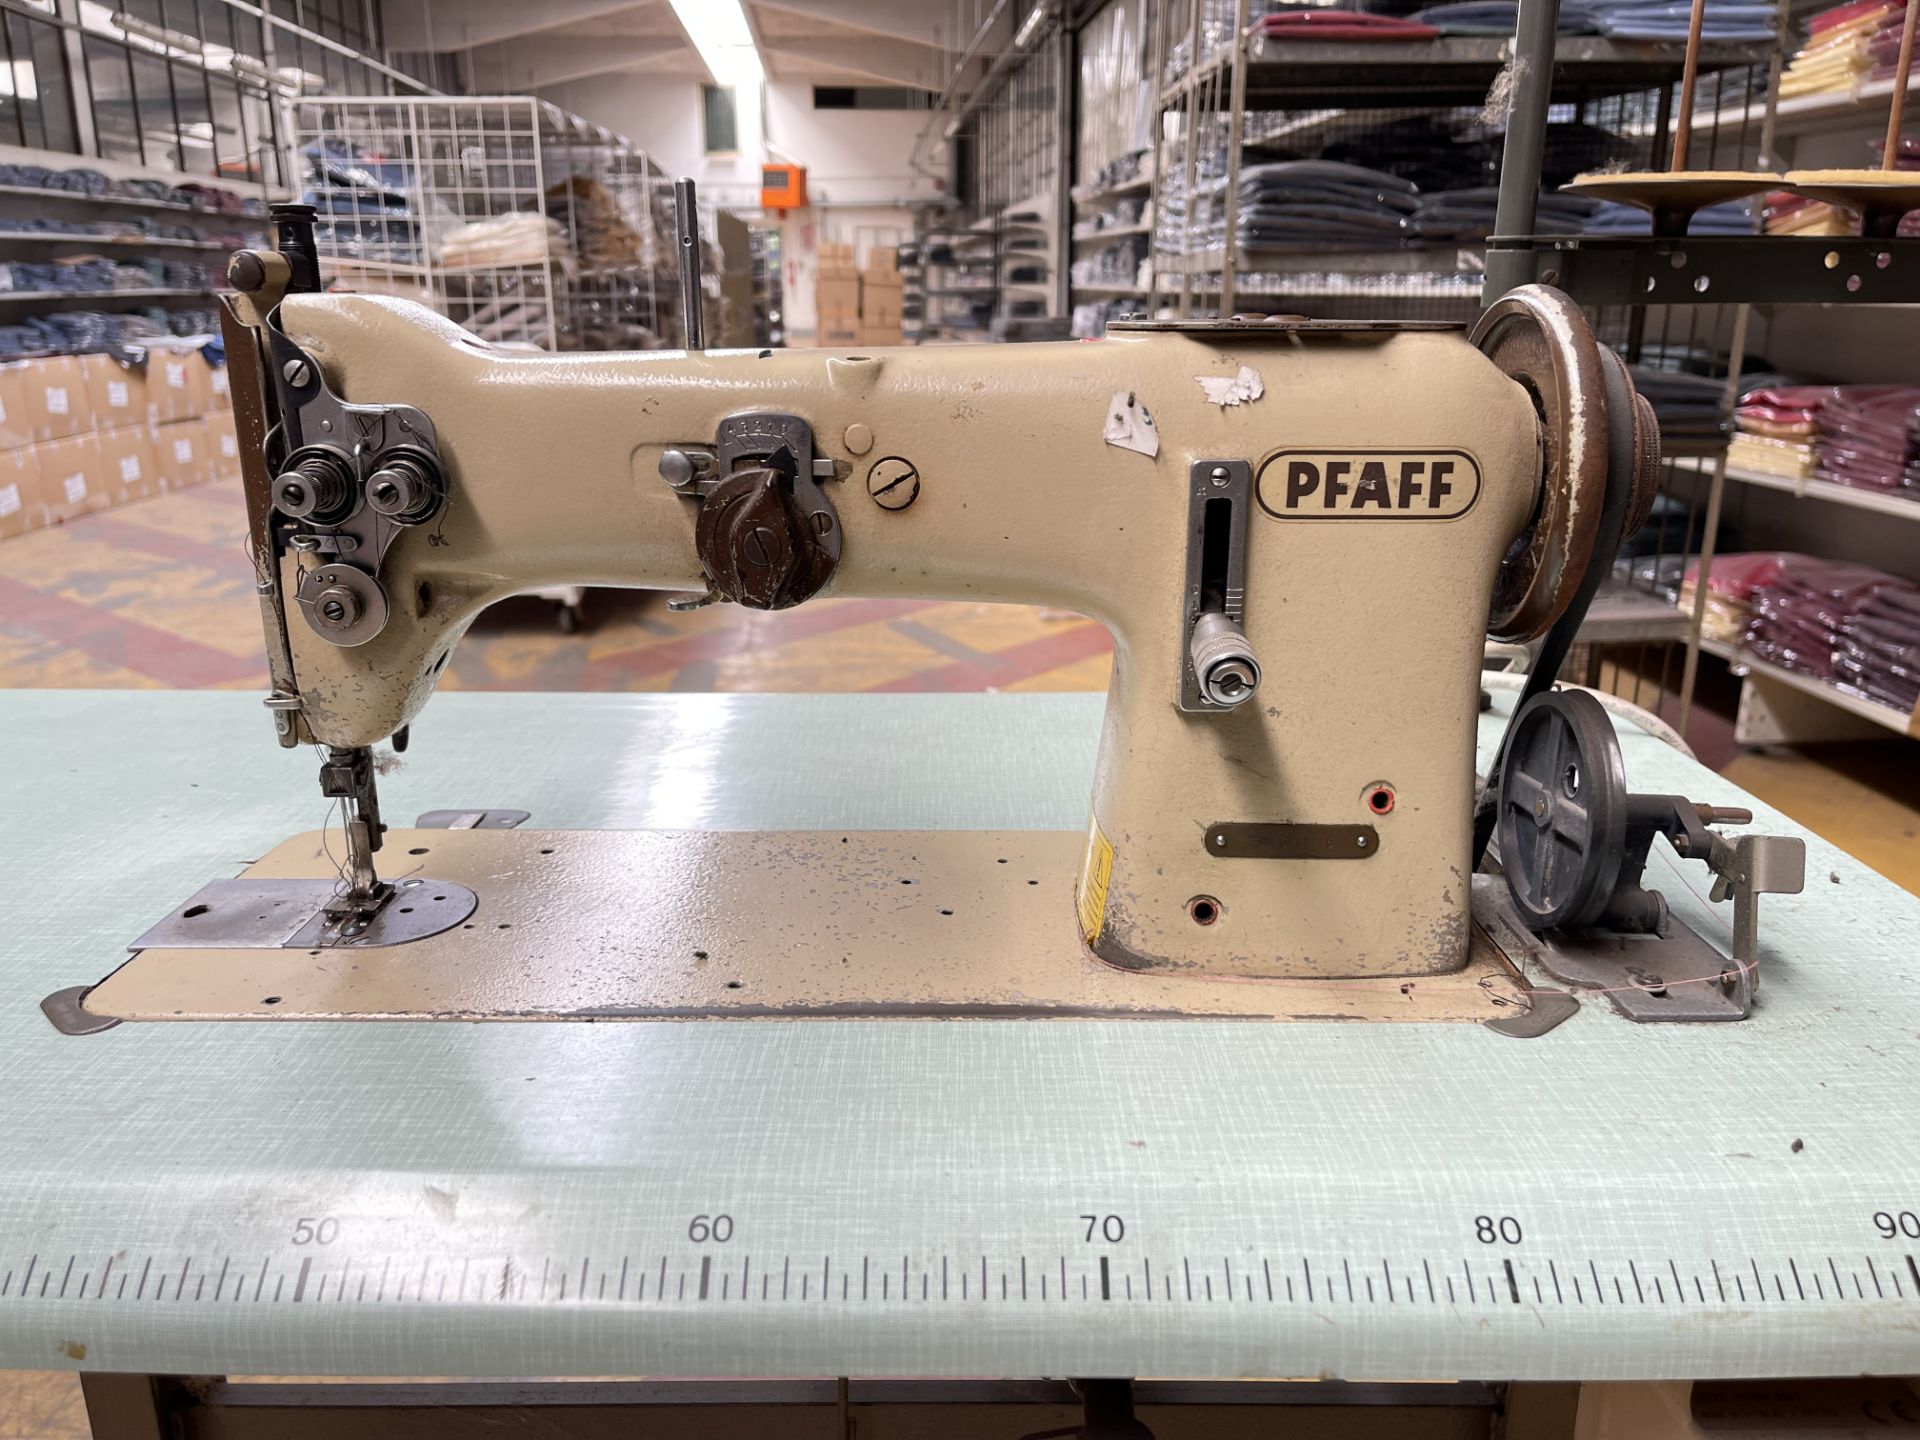 Pfaff Industrial Sewing machine. S/No 138 6BSX4 5 - Image 3 of 7